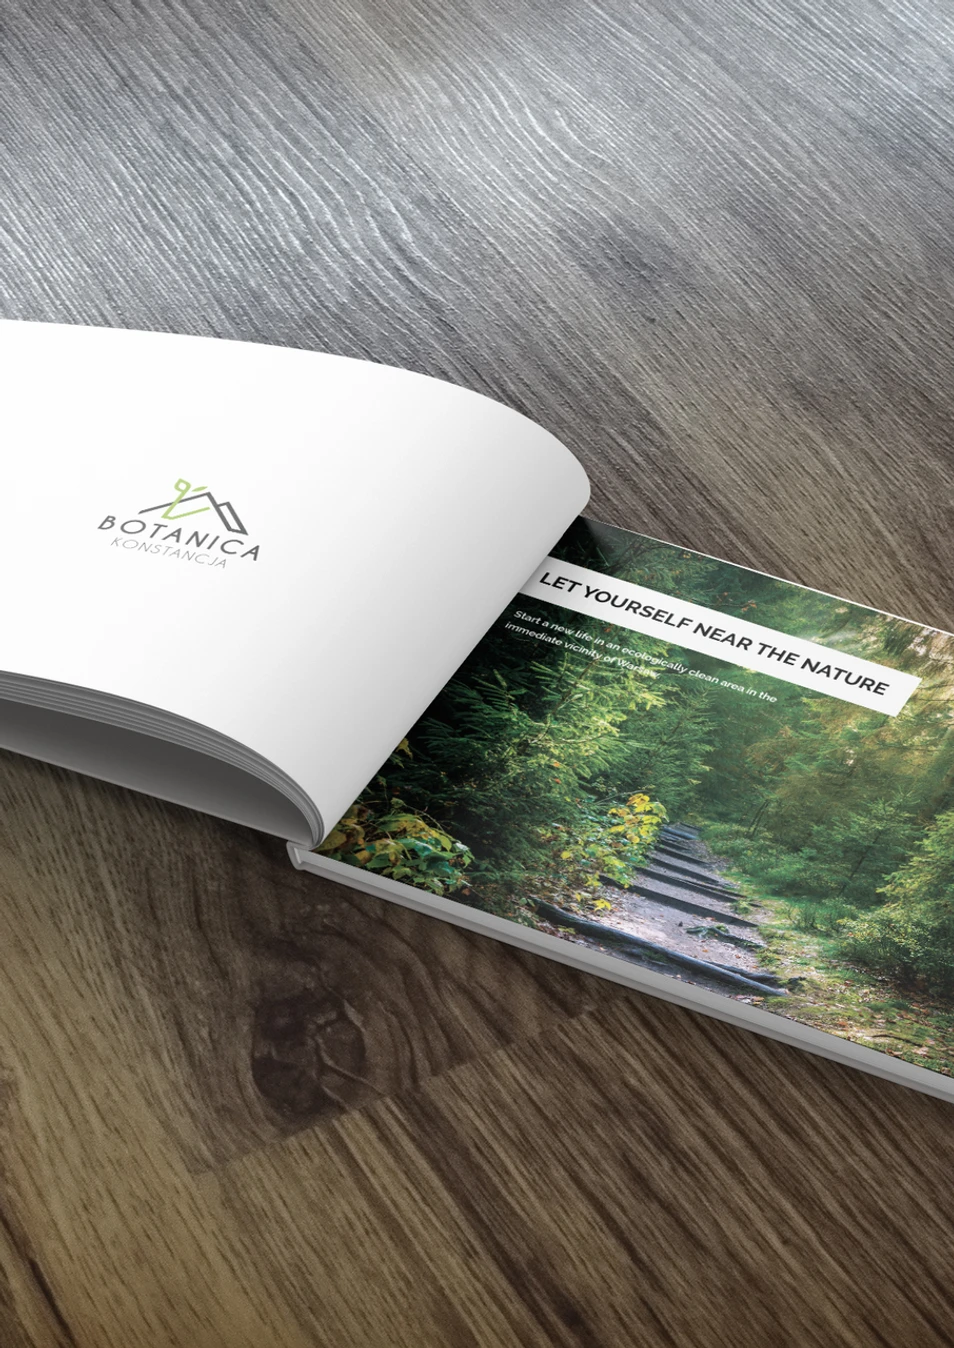 Sales book for Botanica Konstanja's eco-friendly cottage village, beautifully designed and informative.